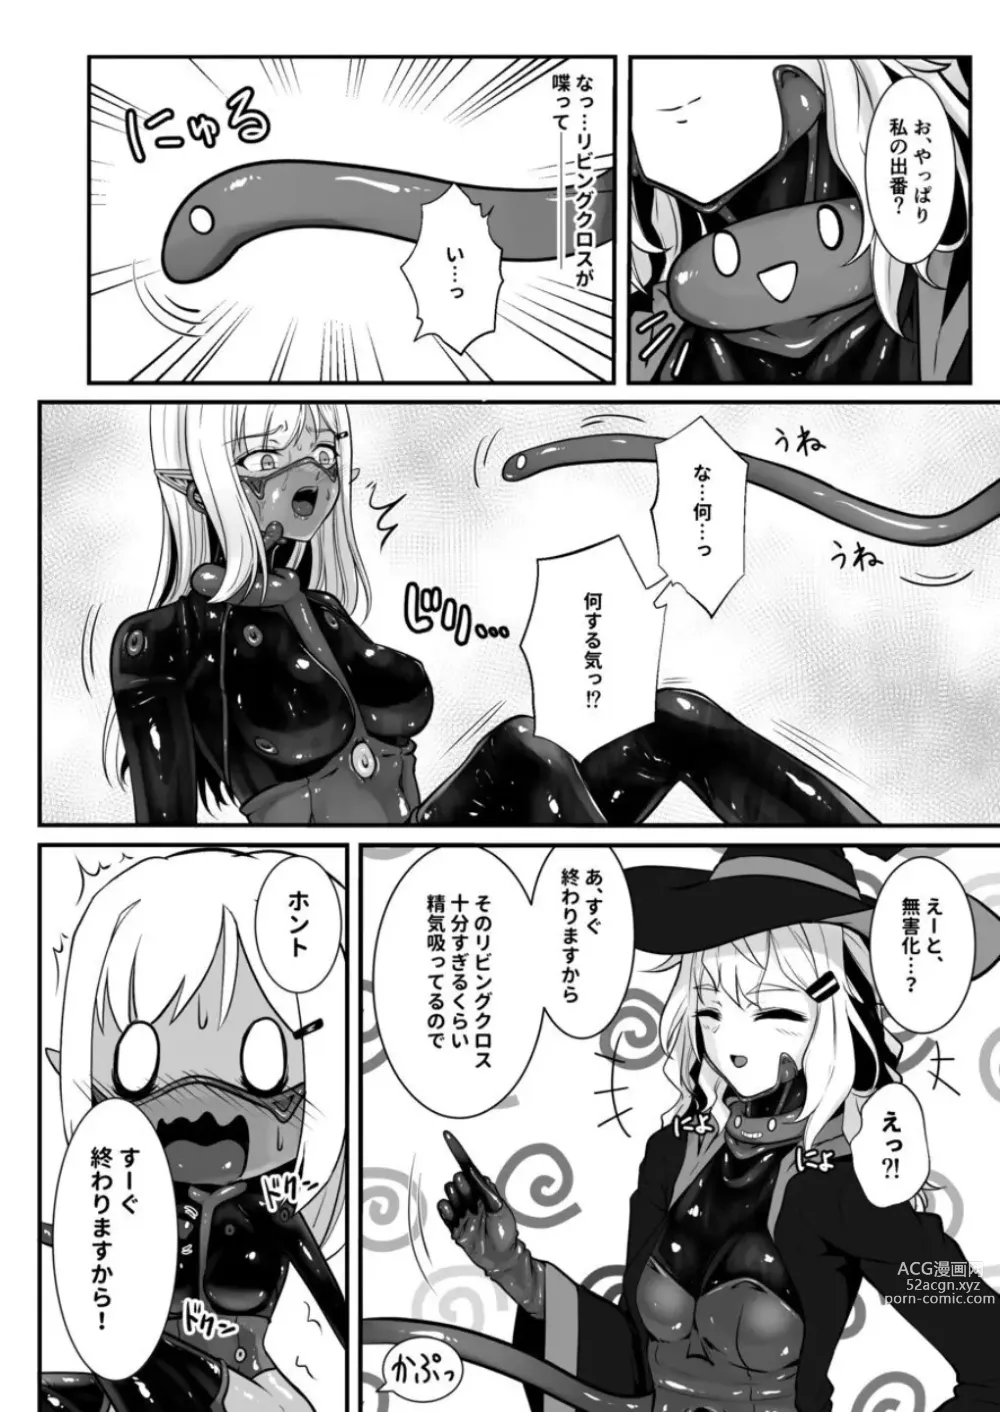 Page 29 of doujinshi Wereelf - Reincarnated in Living clothes... 3